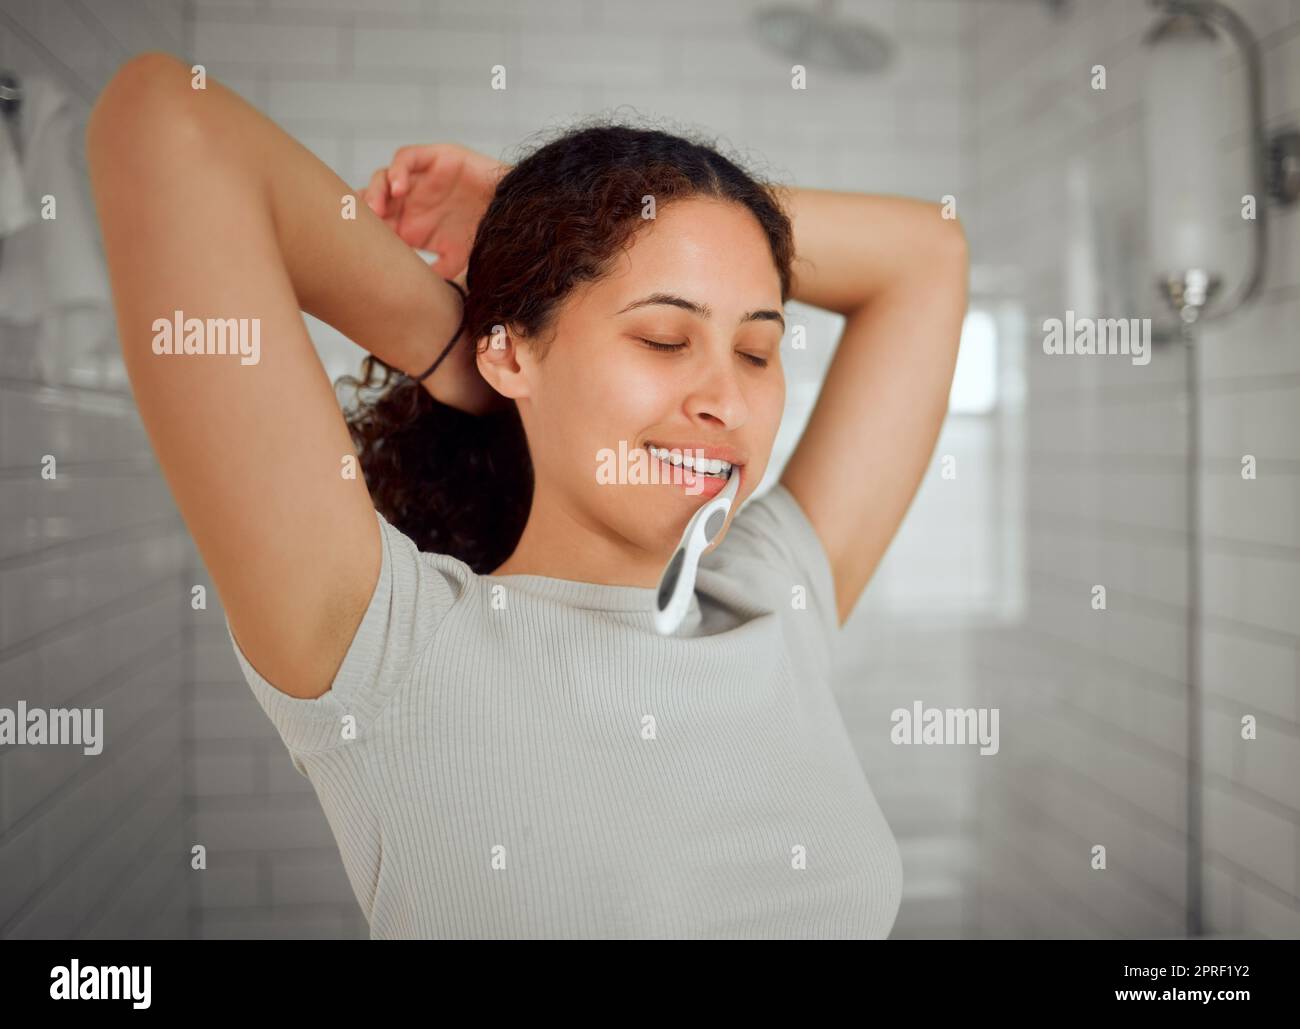 Health, grooming and brushing teeth for dental. oral hygiene with a young woman in bathroom at home. Female caring about the health of teeth and gums with a daily mouth and grooming cleaning routine Stock Photo